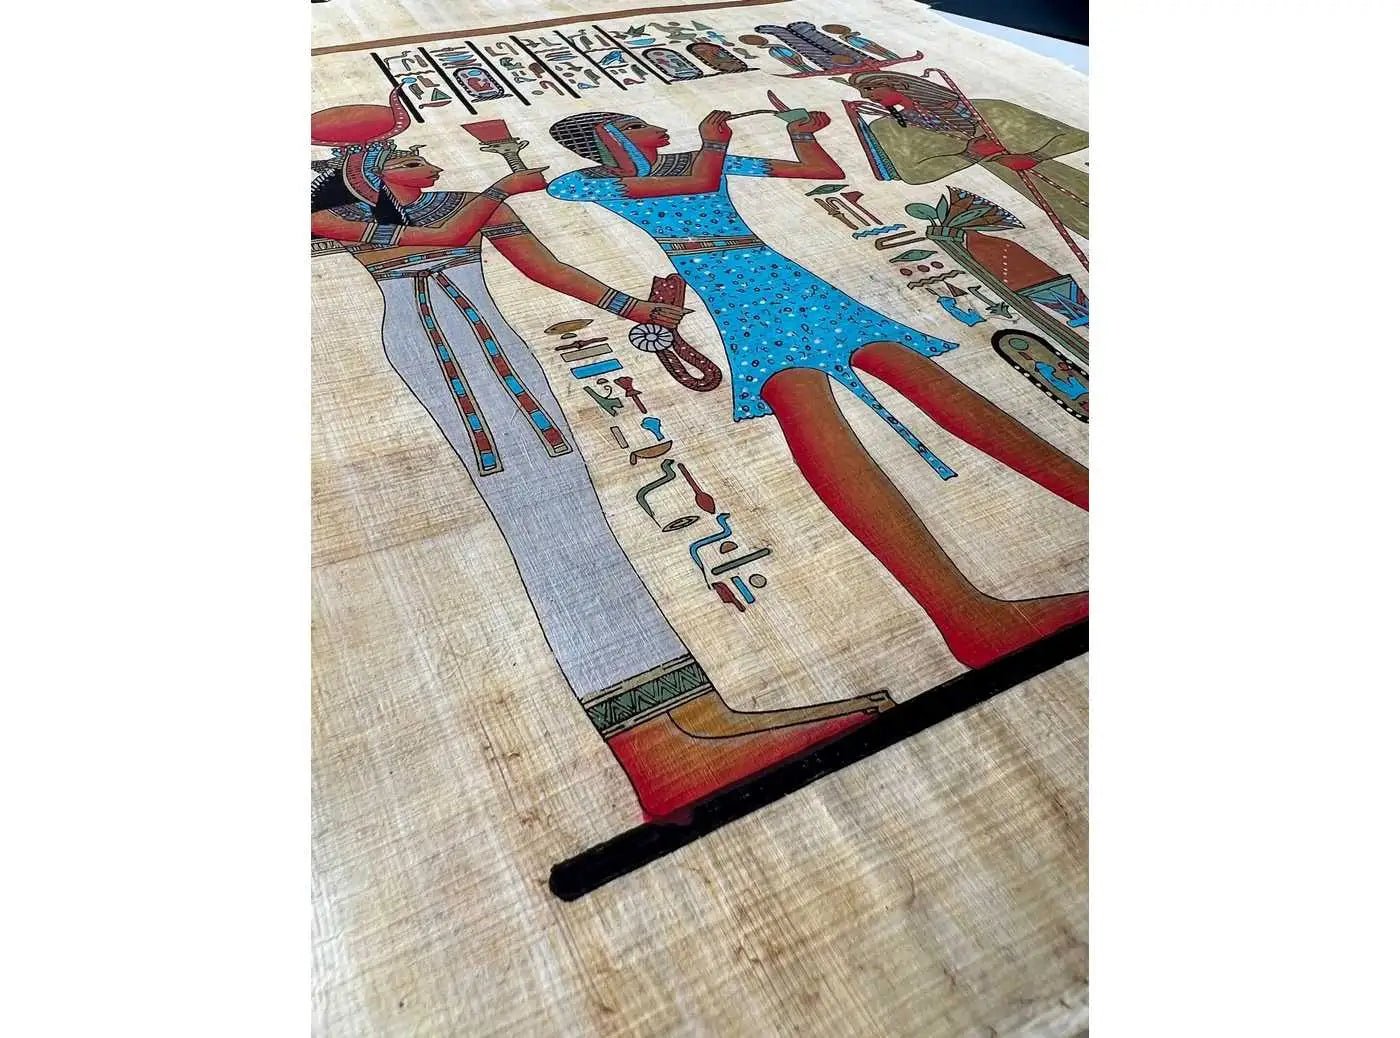 Prince of Egypt - 100% Authentic Egyptian Original Hand Painted Painting Papyrus - Egypt Papyrus Painting